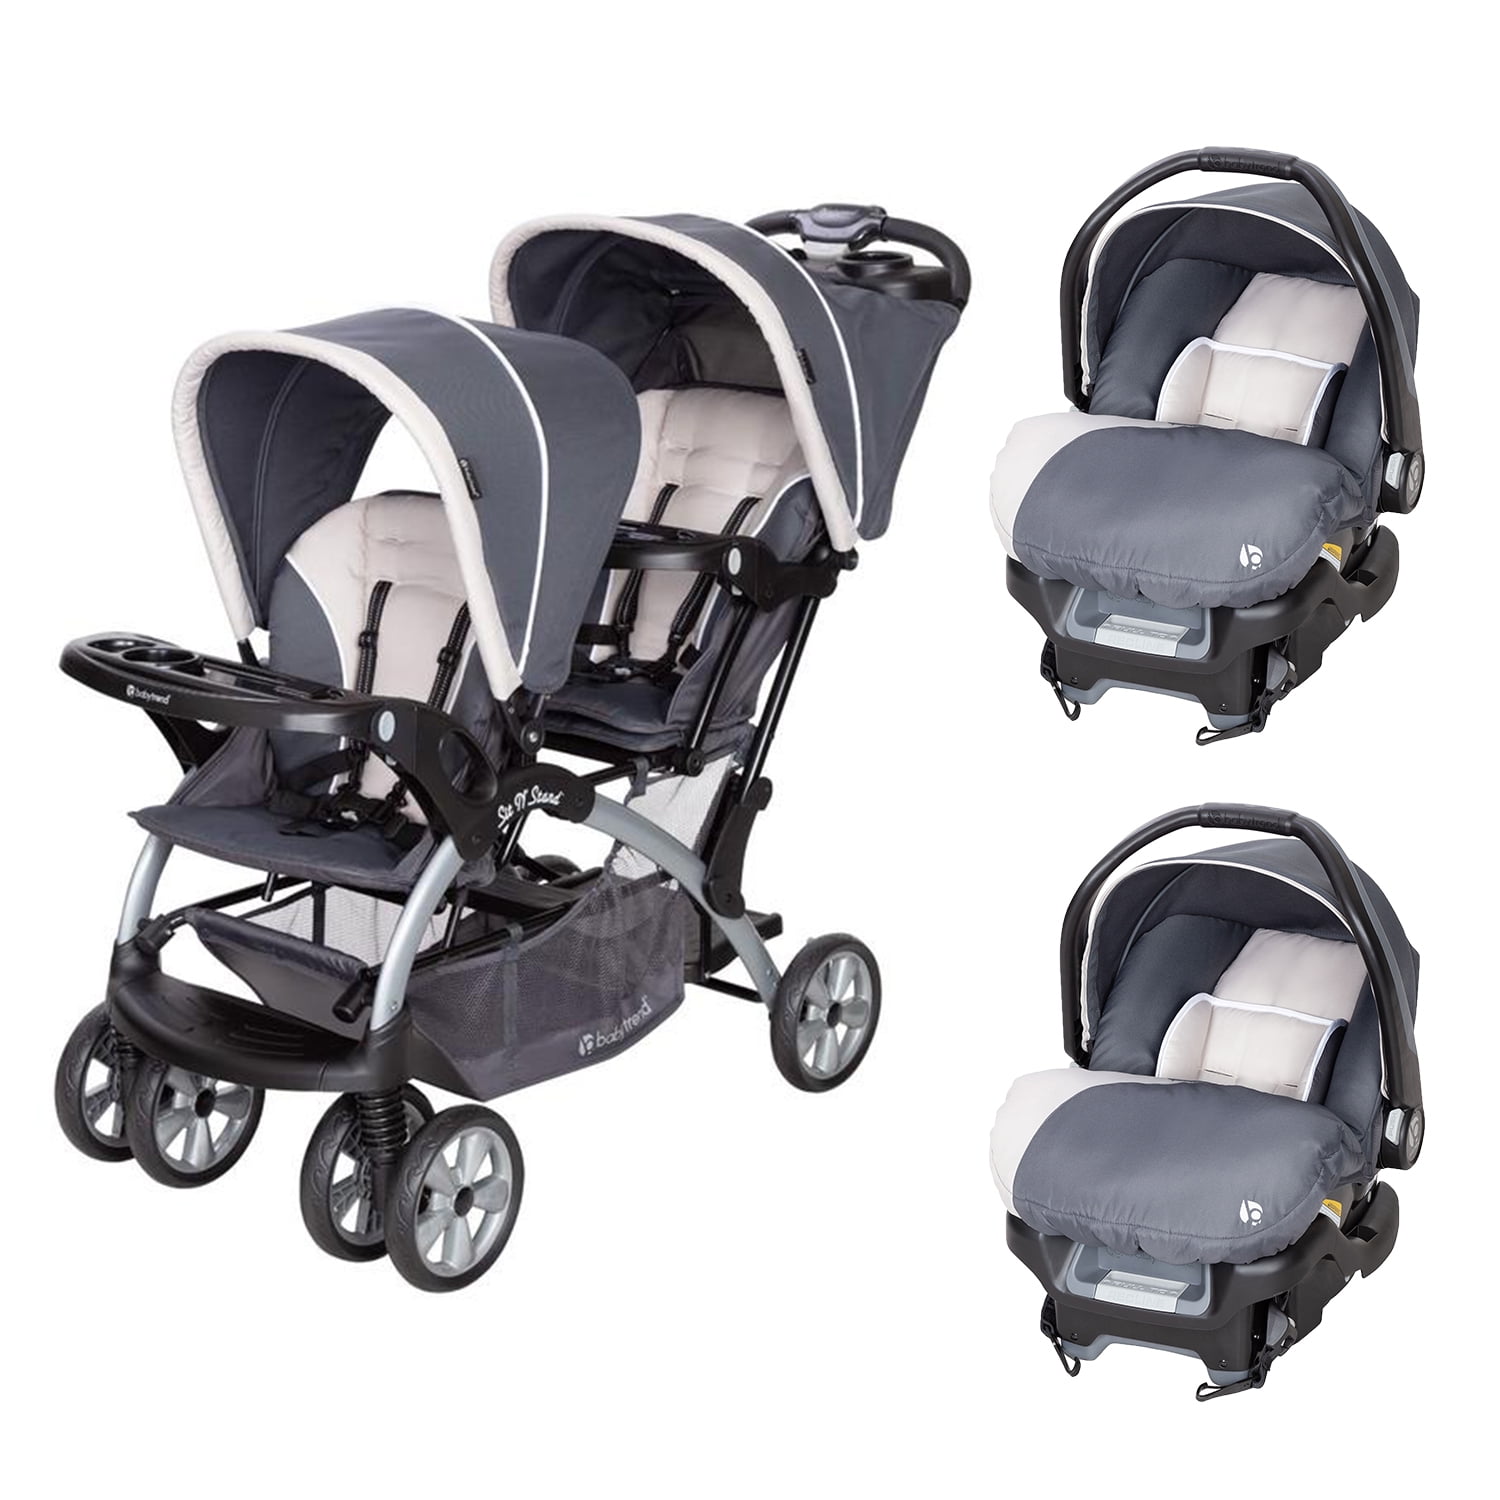 Tandem Stroller Car Seats, Baby Trend Twin Stroller With Car Seats